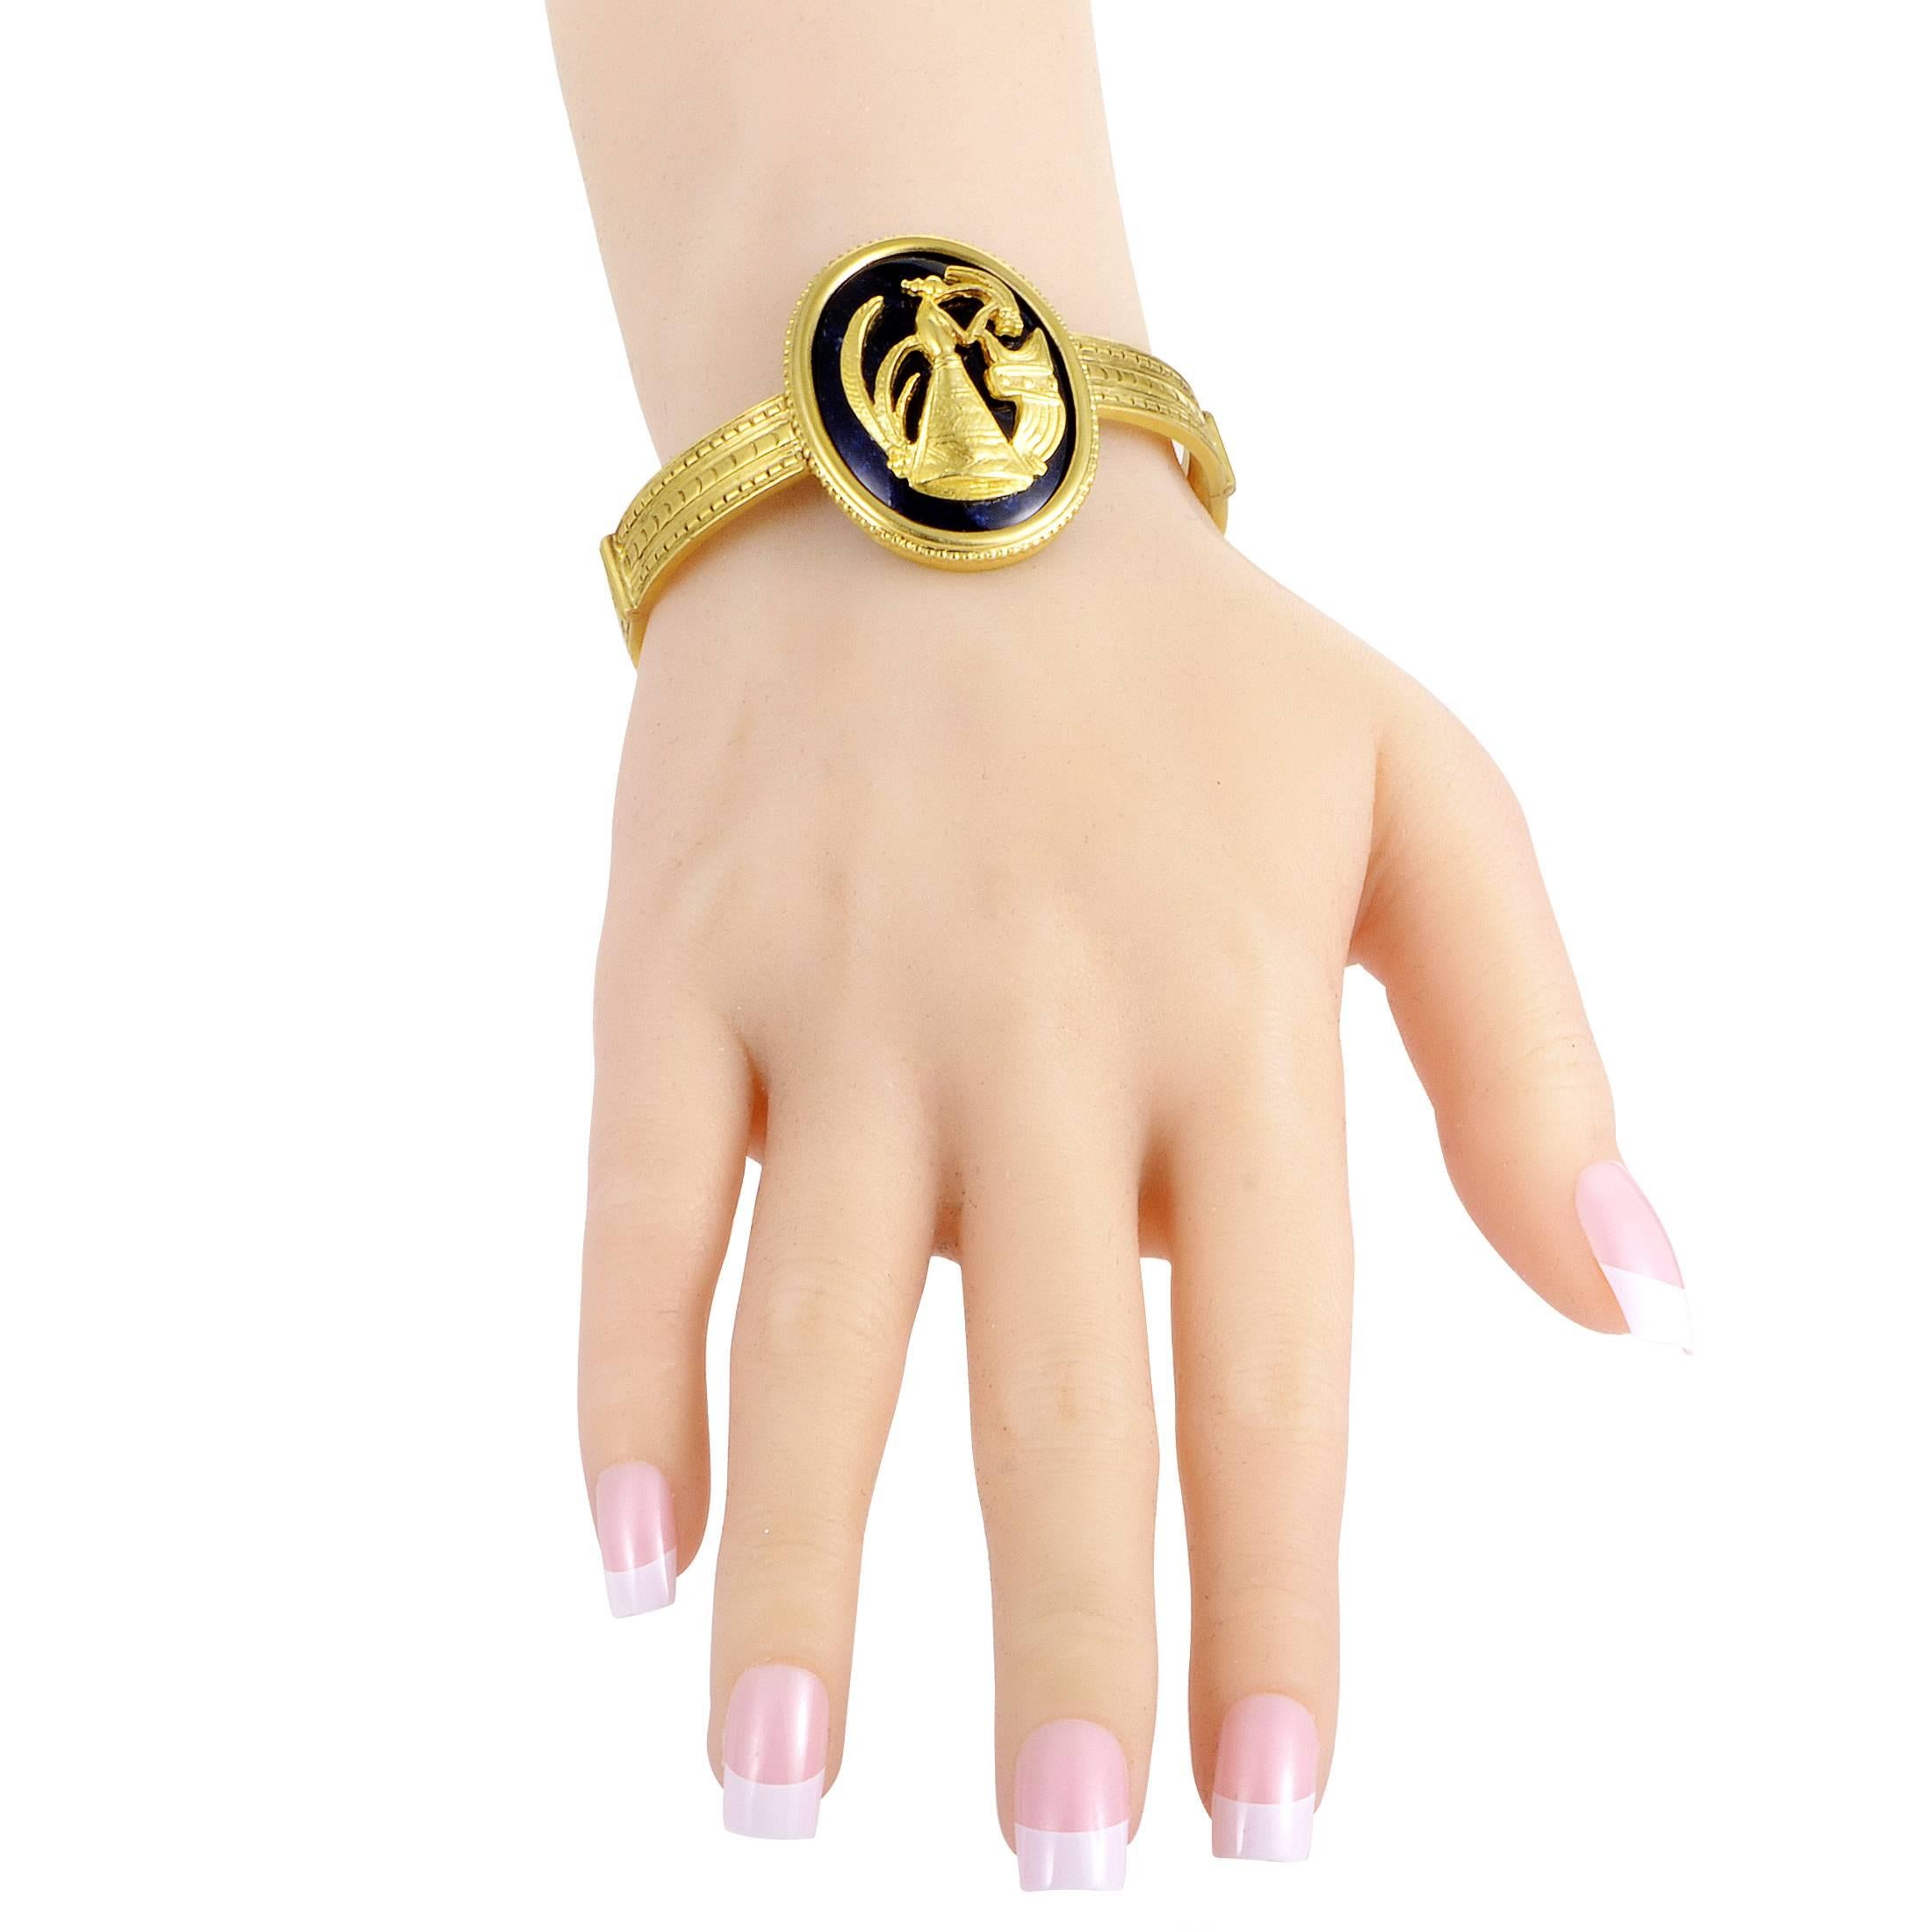 Depicting a wonderful artistic scene in fabulous 18K yellow gold against captivating dark enamel, this gorgeous bracelet from Ilias Lalaounis also boasts compelling ornamentation along its length to produce a classic allure.
Charm Dimensions: 1.5 x